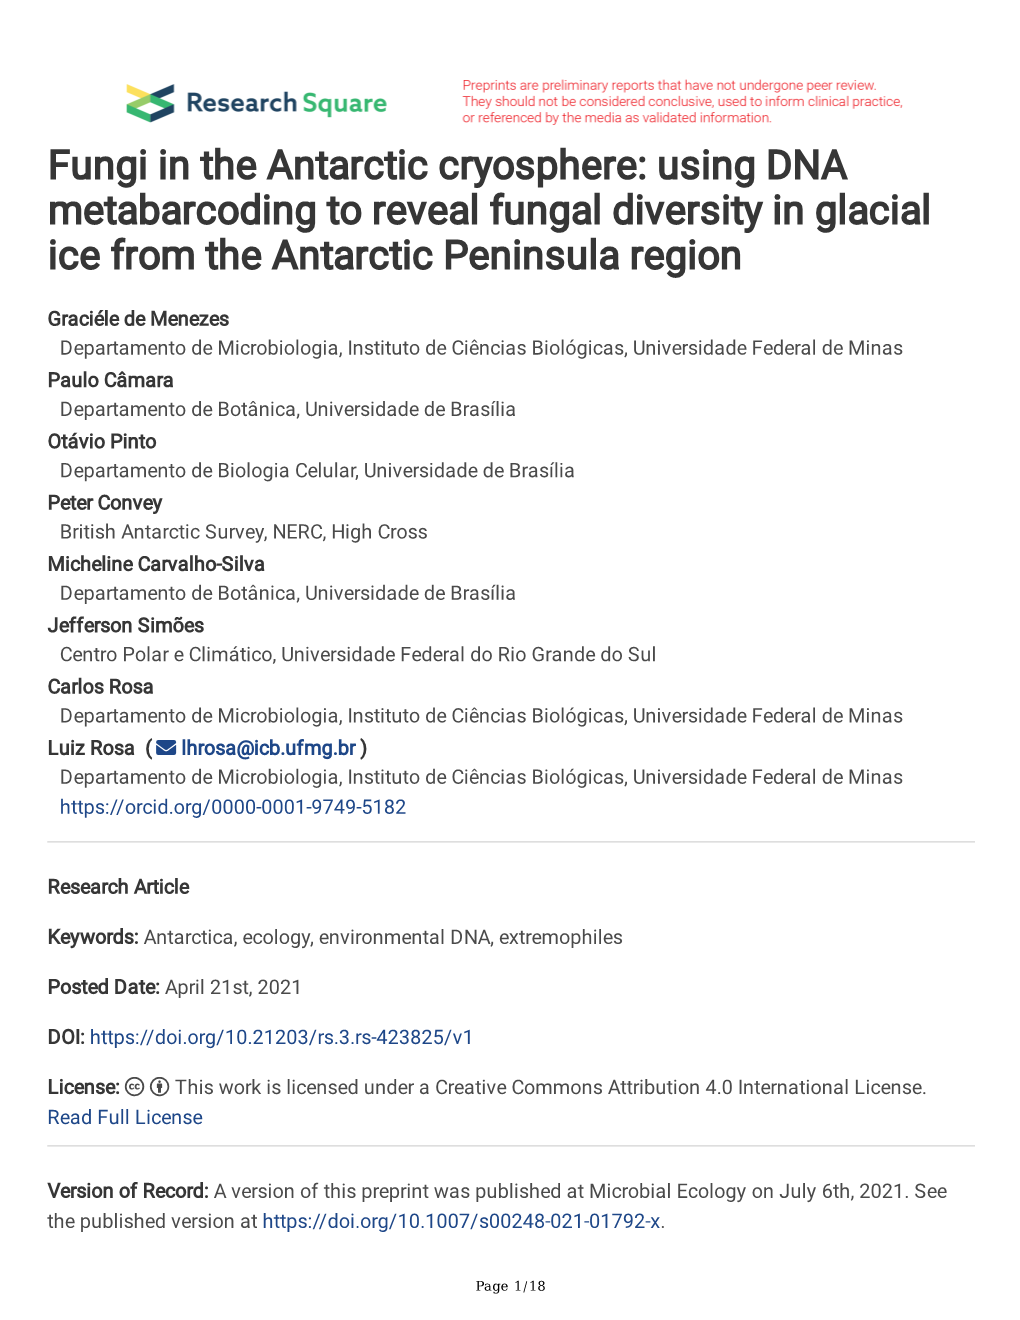 Fungi in the Antarctic Cryosphere: Using DNA Metabarcoding to Reveal Fungal Diversity in Glacial Ice from the Antarctic Peninsula Region